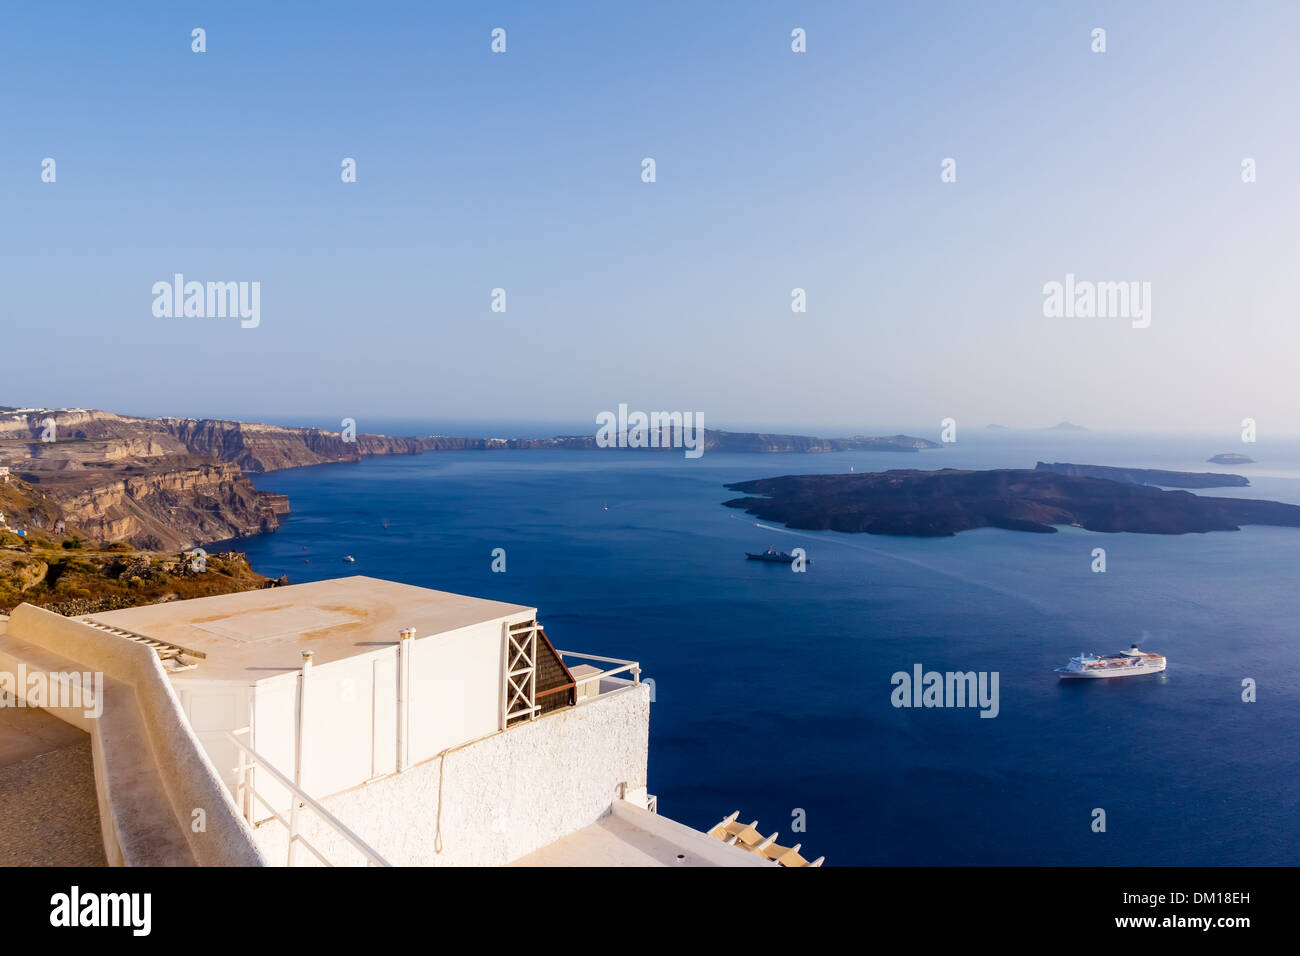 Nea Kameni volcanic island in Santorini Greece with ships in front photographed from a high point of view Stock Photo